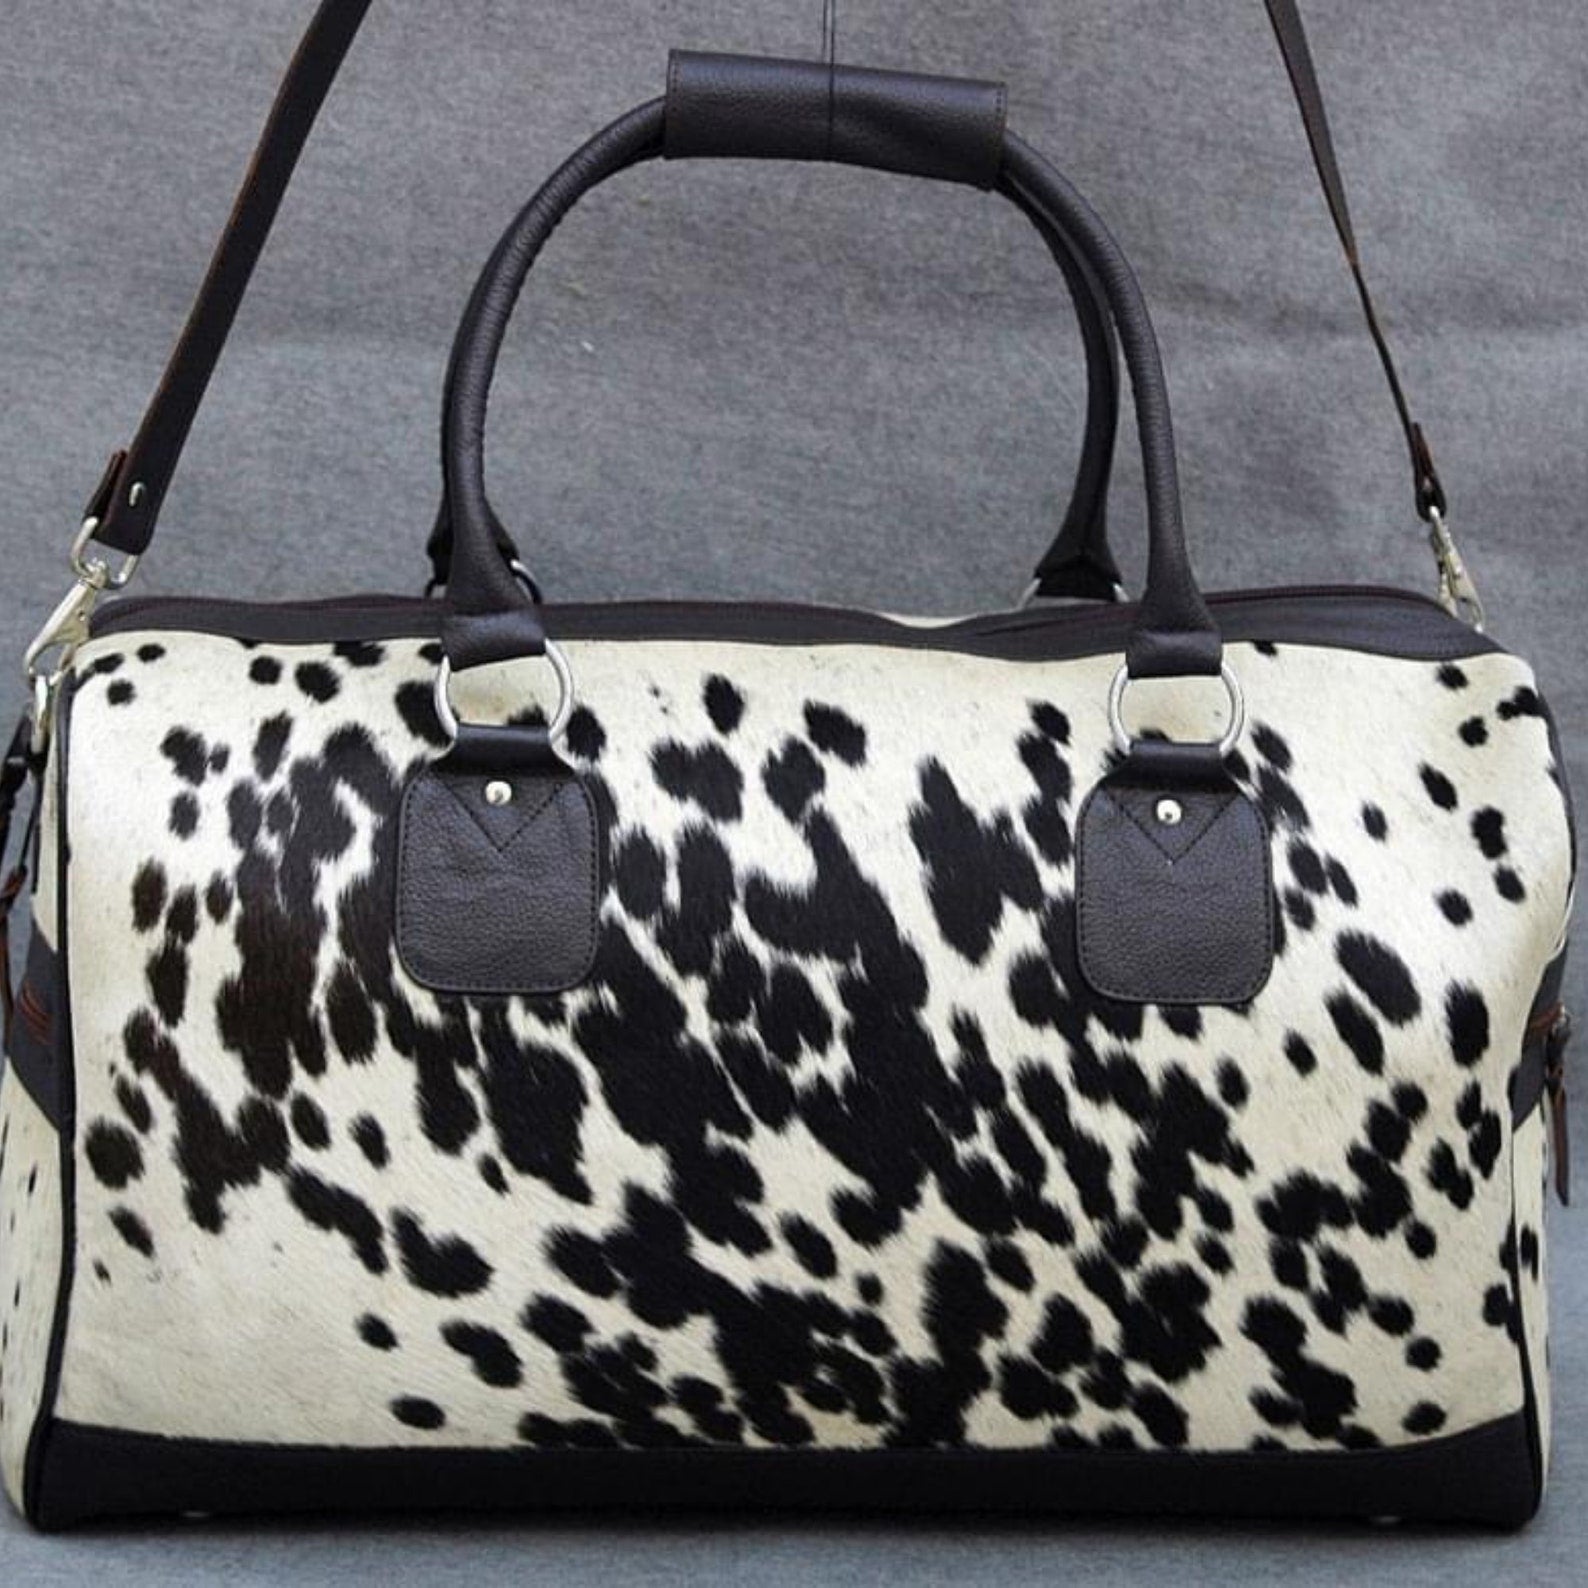 Embrace luxury travel with a sophisticated cow fur duffle bag, designed to complement your jet-setting lifestyle.